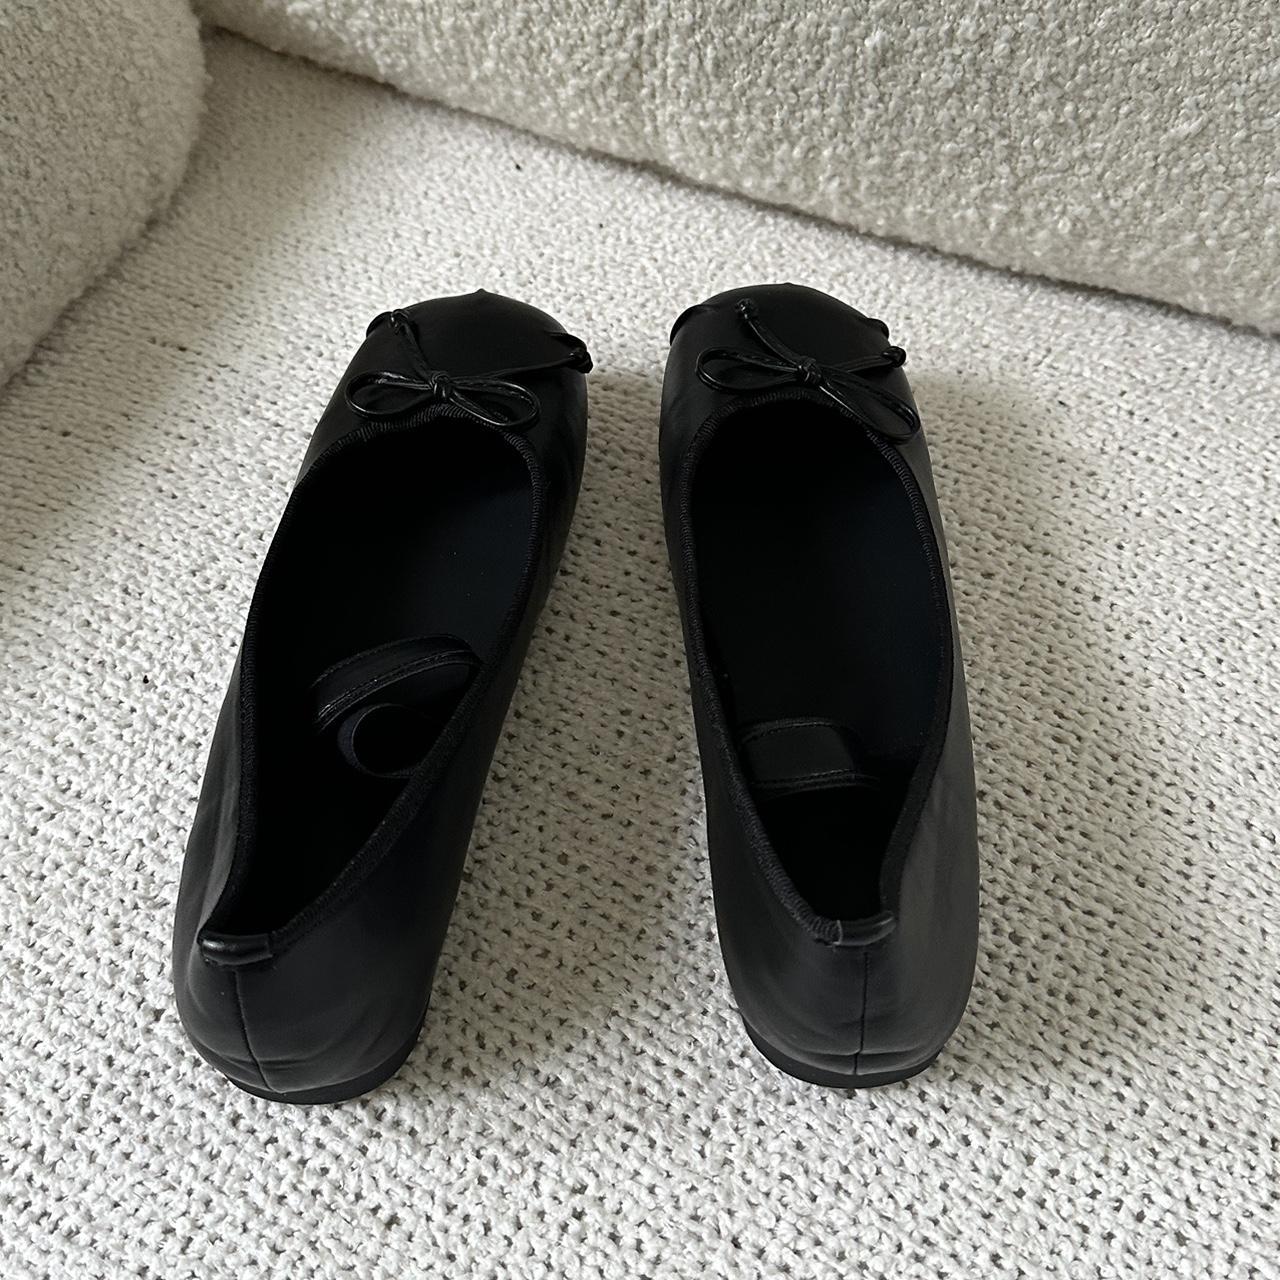 Black flats with strap Soft and comfortable Light... - Depop